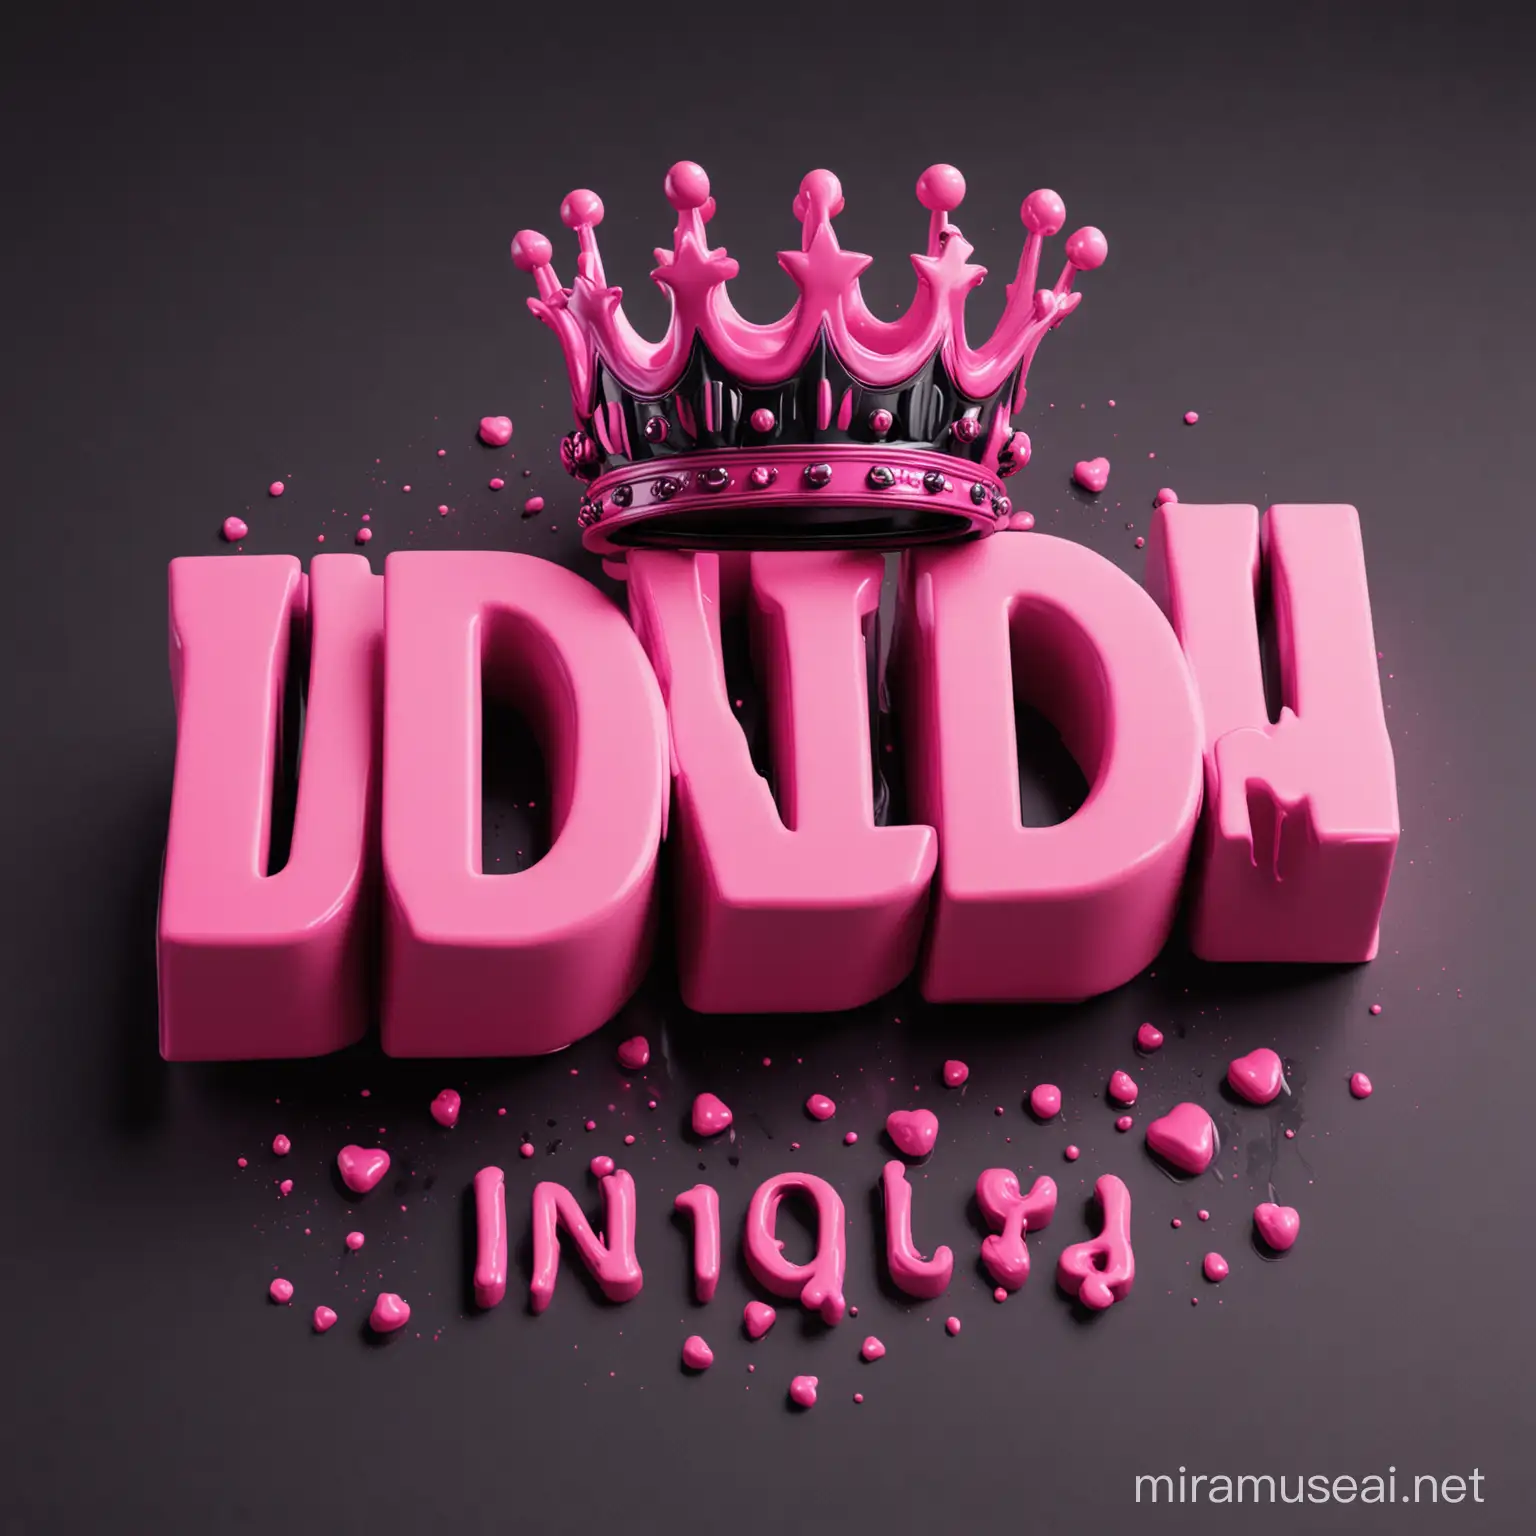 
Logo of a buisness, Pink ,3D letters with a crown with neon black melting name INDY


